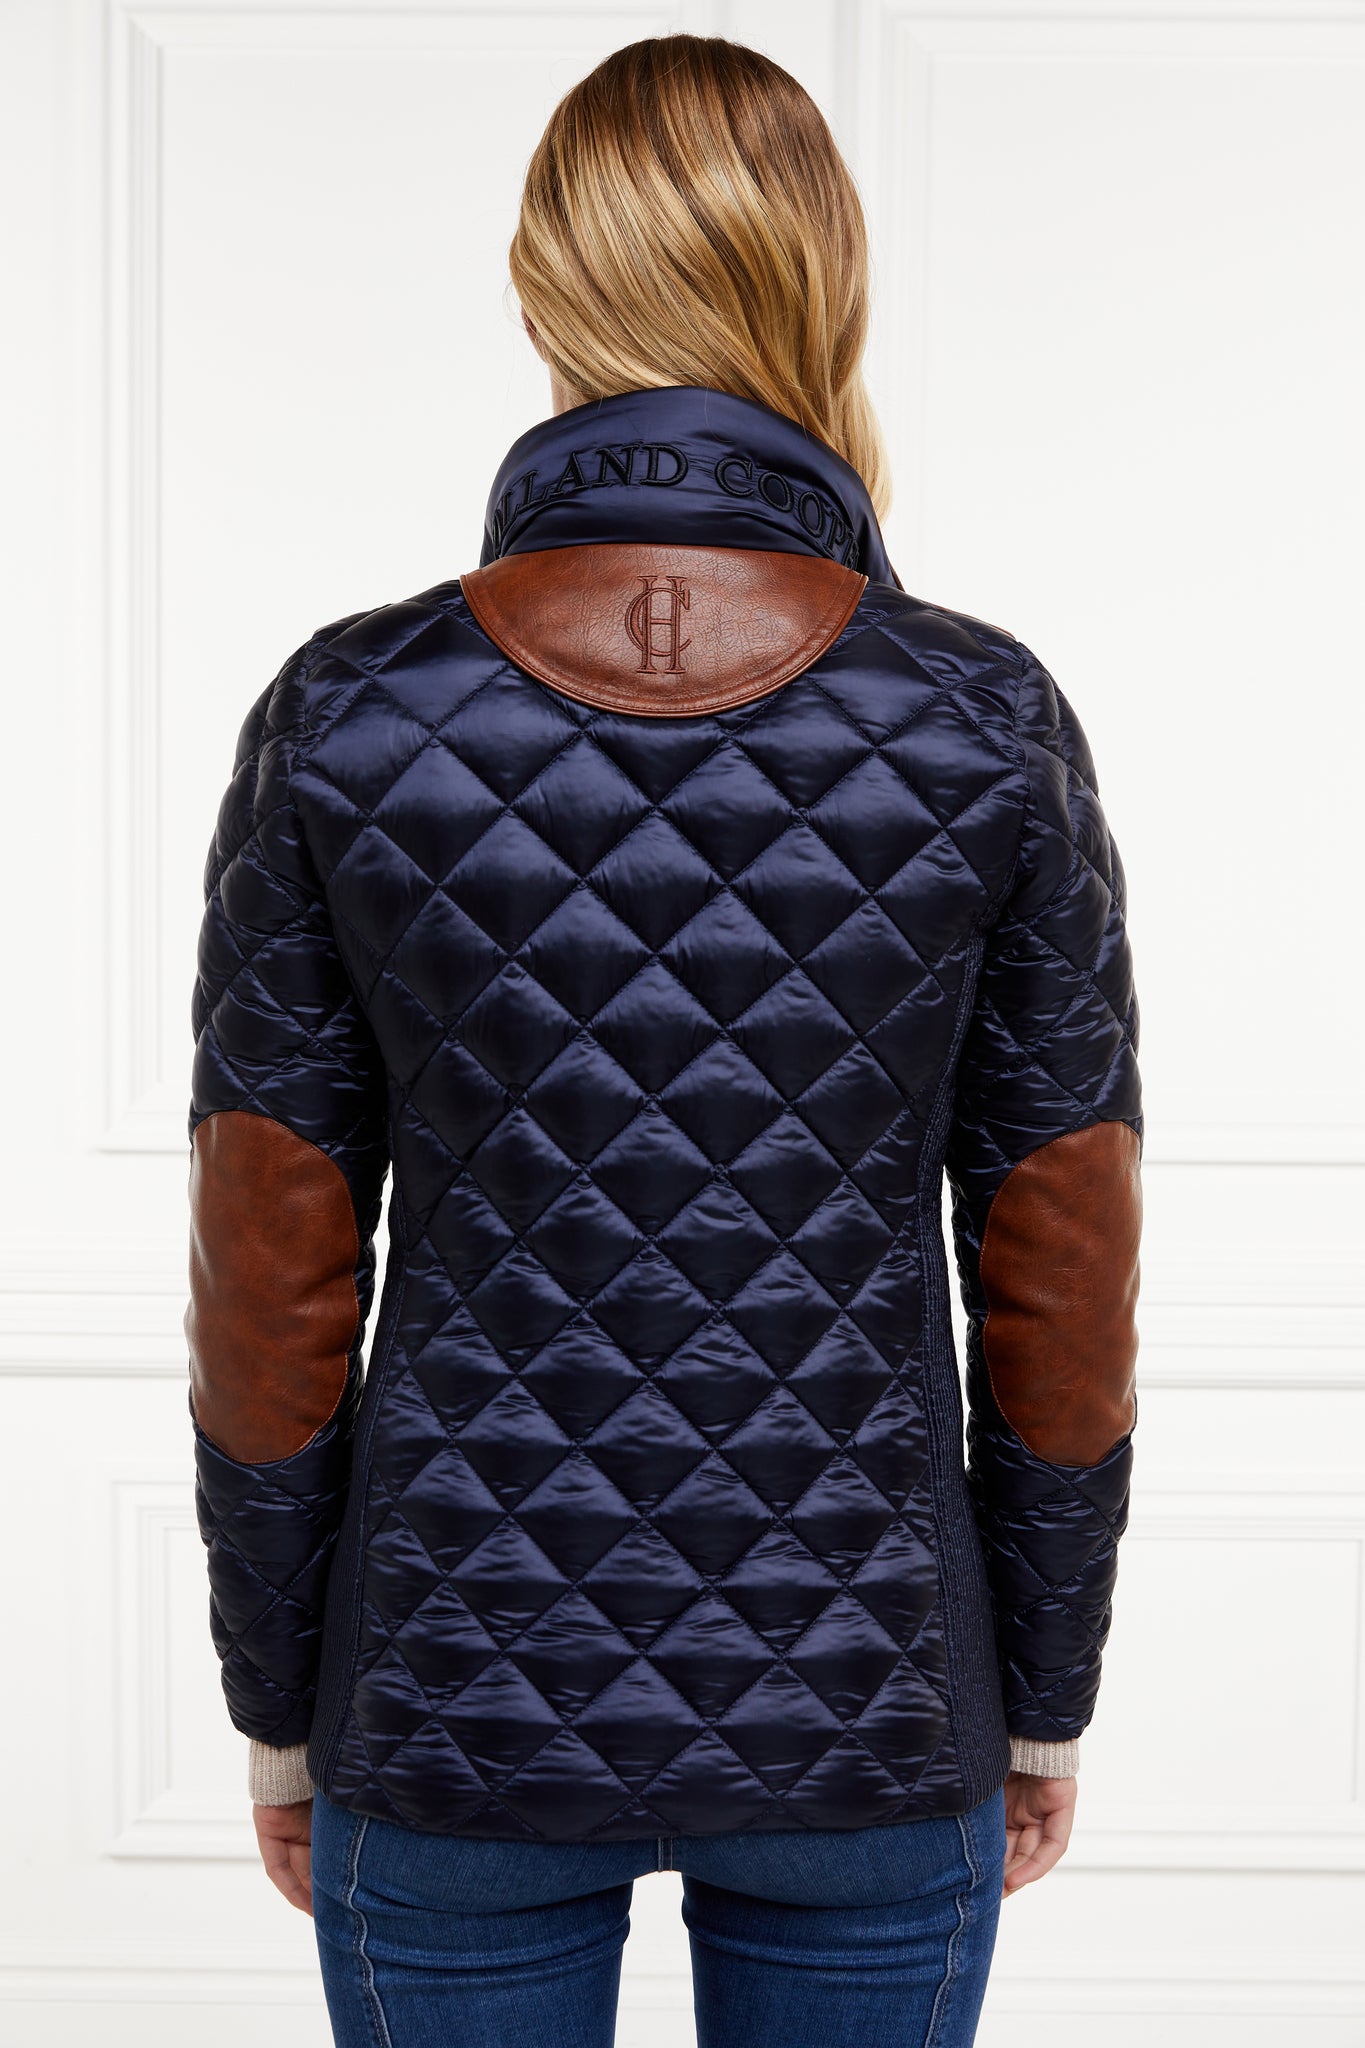 back of womens diamond quilted navy jacket with contrast tan leather elbow and shoulder pads large front pockets and shirred side panels